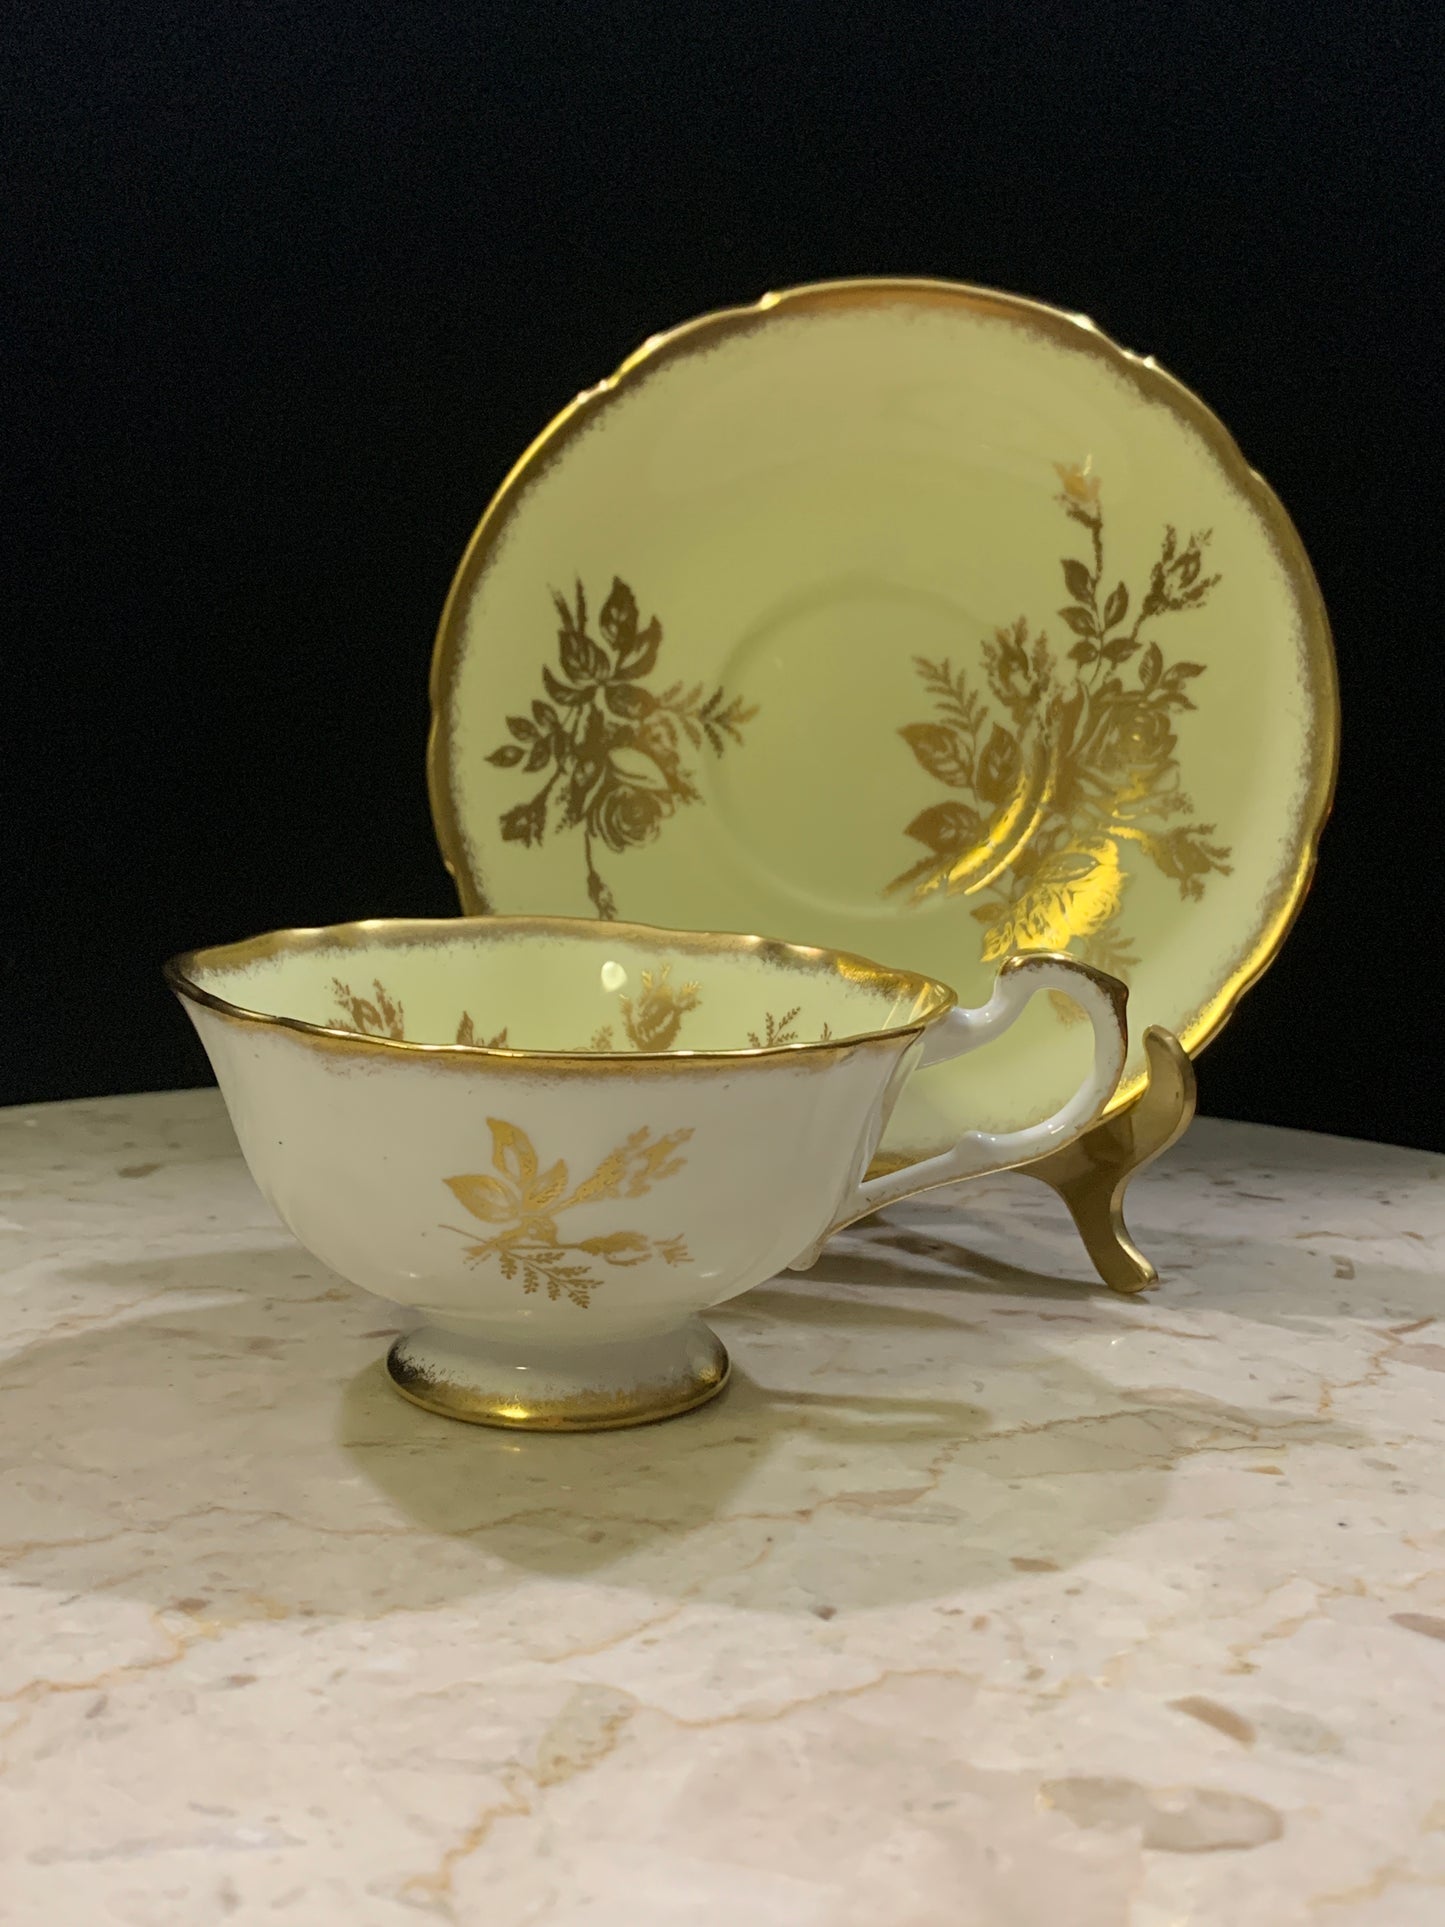 Yellow and Gold Vintage Tea Cup Paragon Wide Mouth Teacup and Saucer